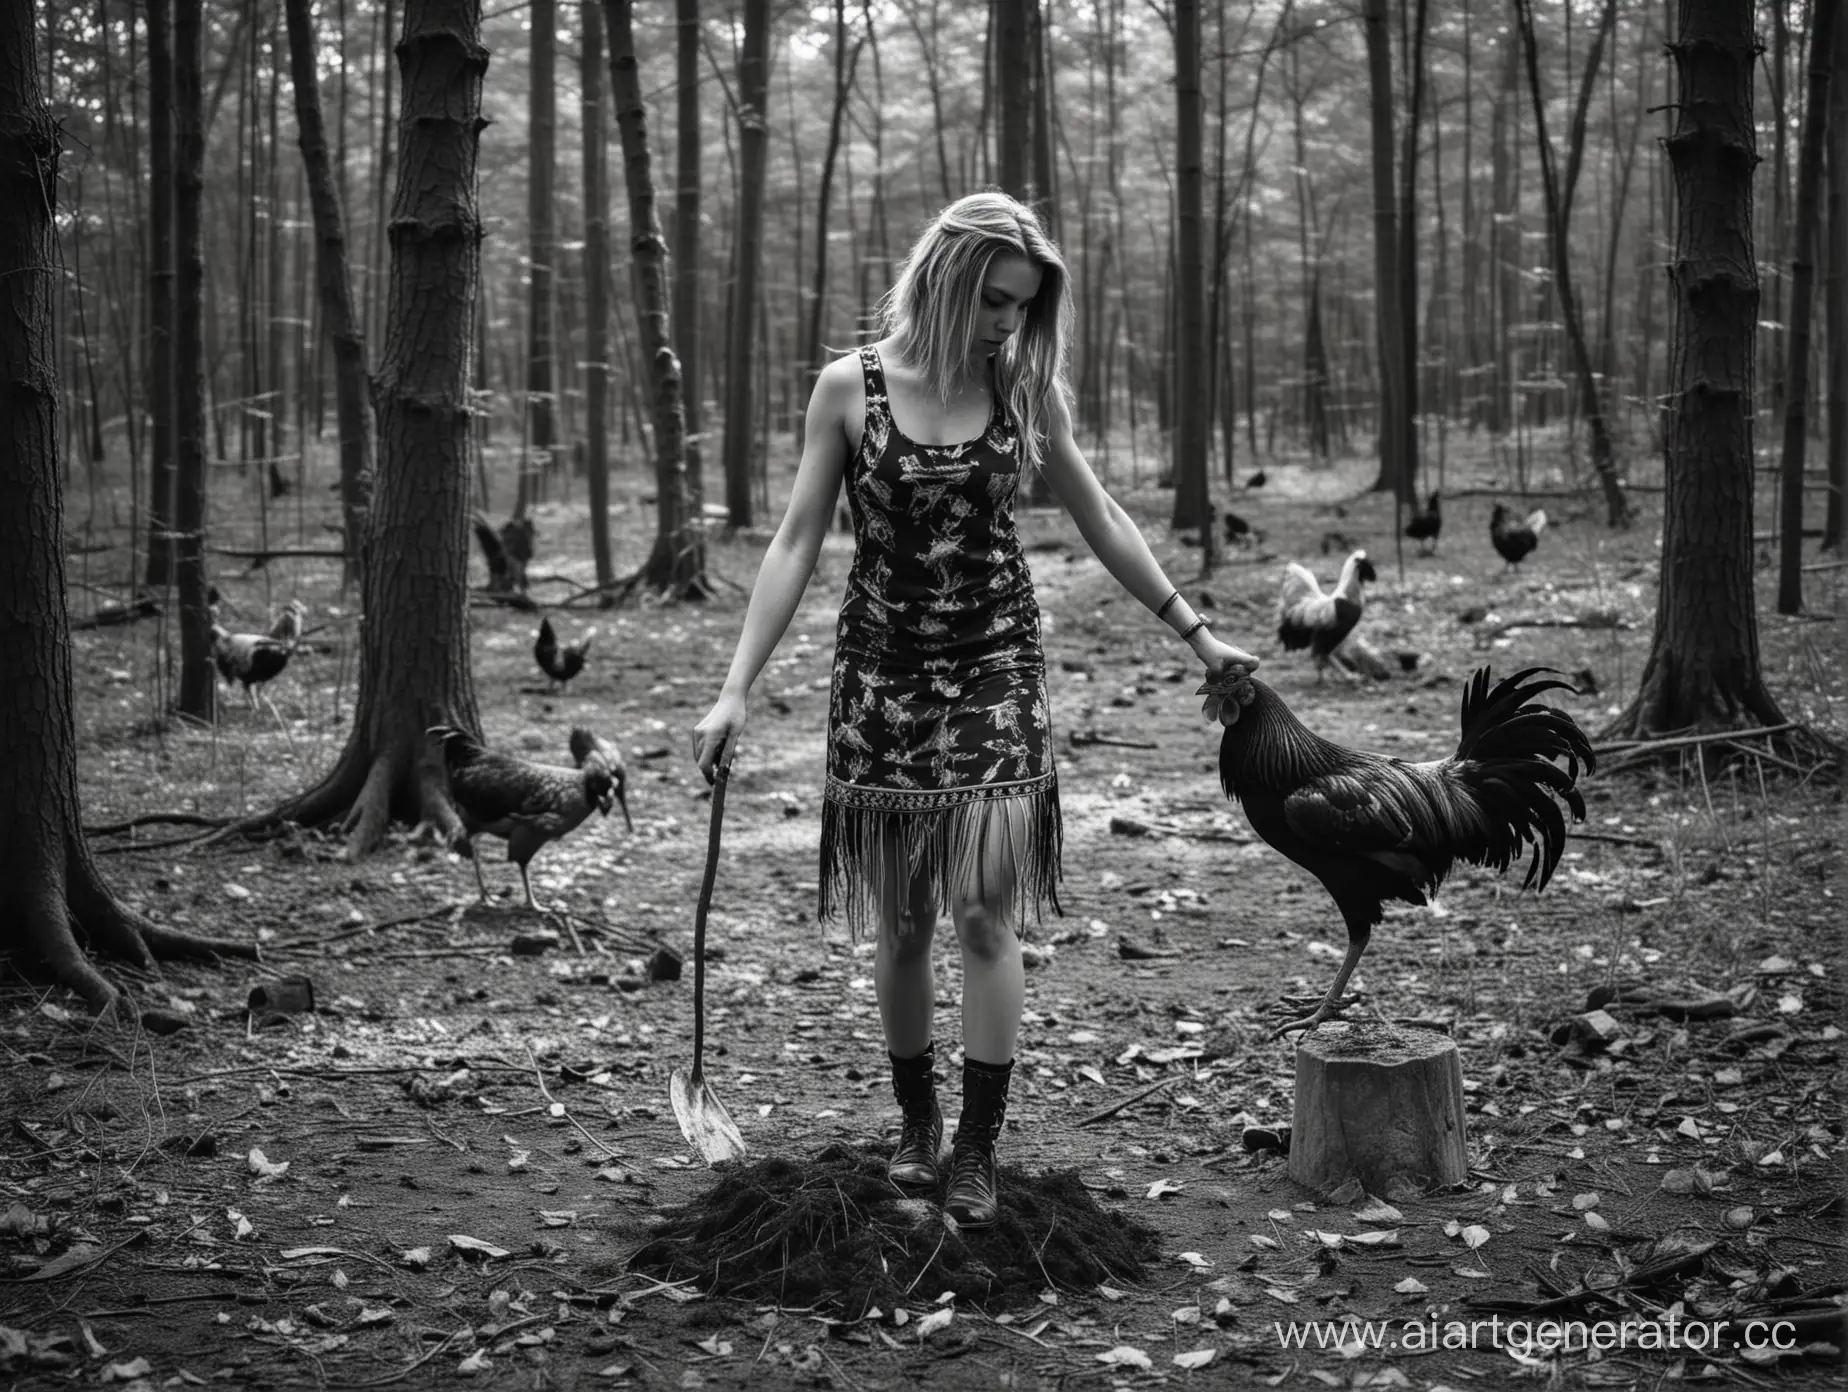 Satanic-Ritual-Girl-Sacrificing-Rooster-in-Woods